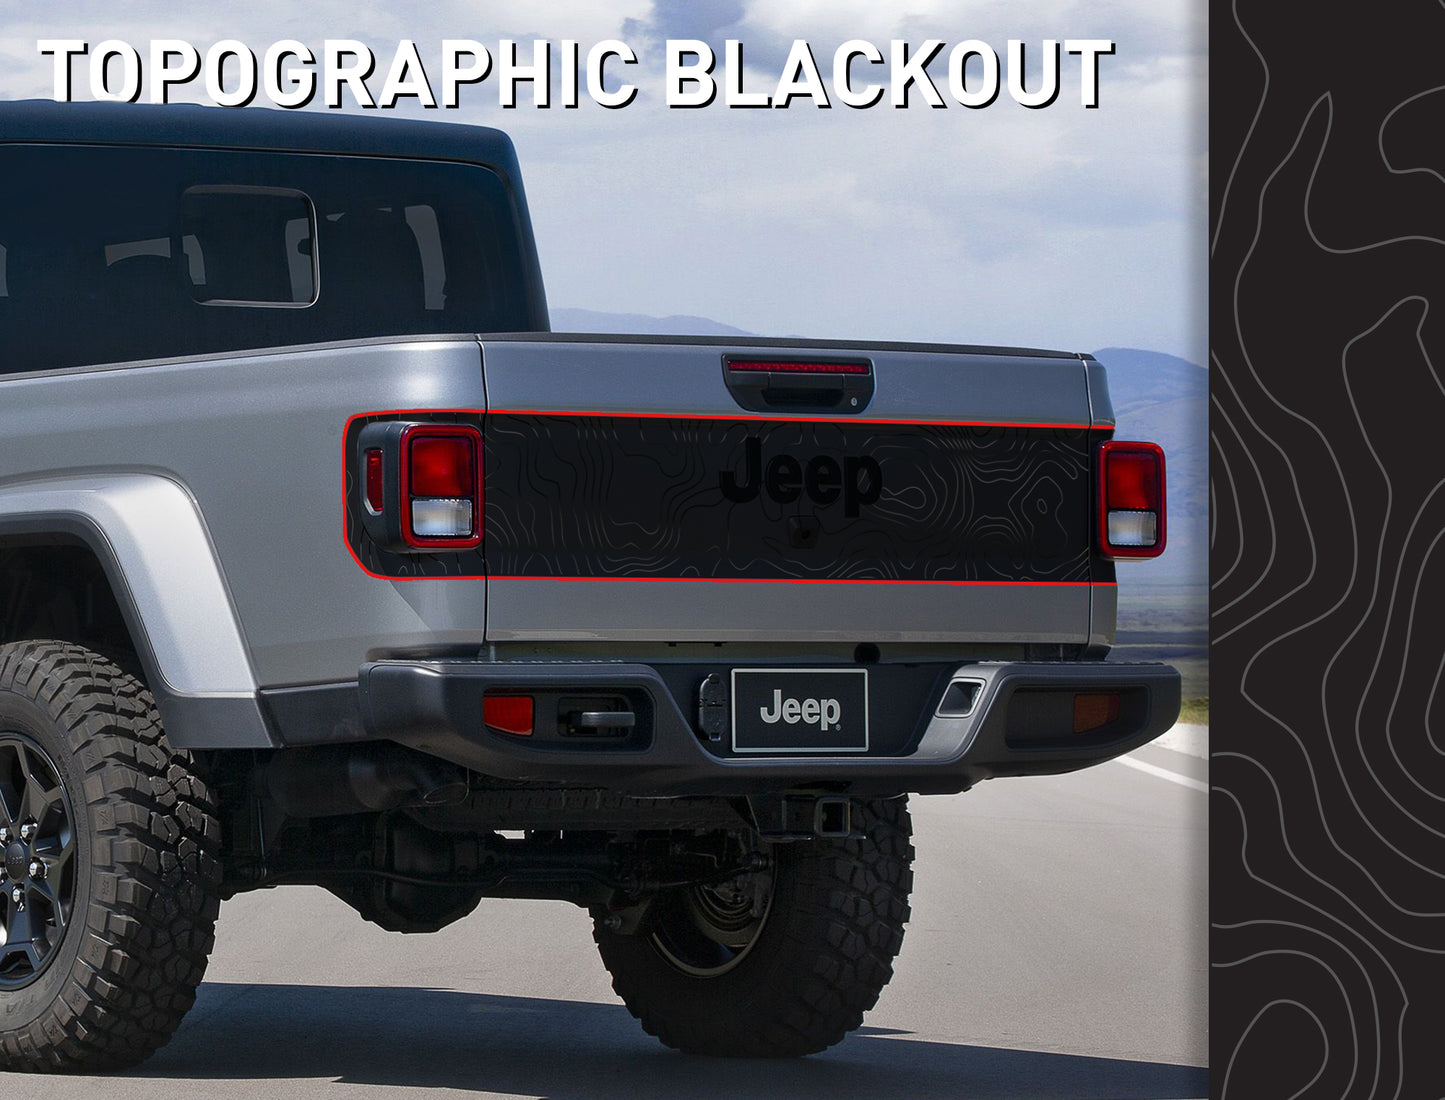 Topographic Tailgate Decal- Red Line Rubicon Blackout tailgate decal set- fits 2020 and newer Jeep Gladiator